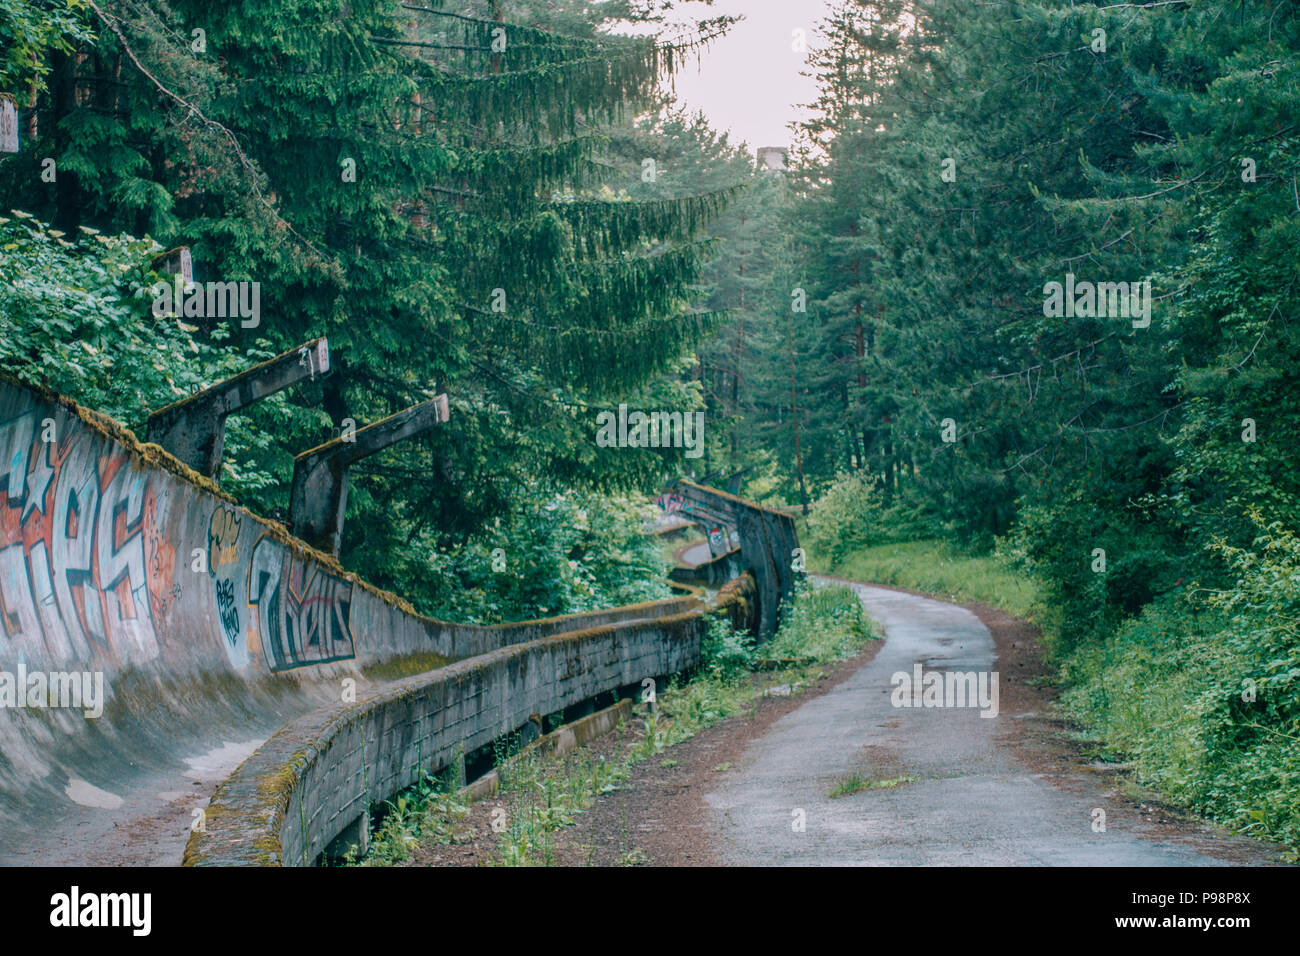 the now-disused concrete of the 1984 Sarajevo Olympic Bobsleigh and Luge Track curves through the forest, covered in graffiti Stock Photo